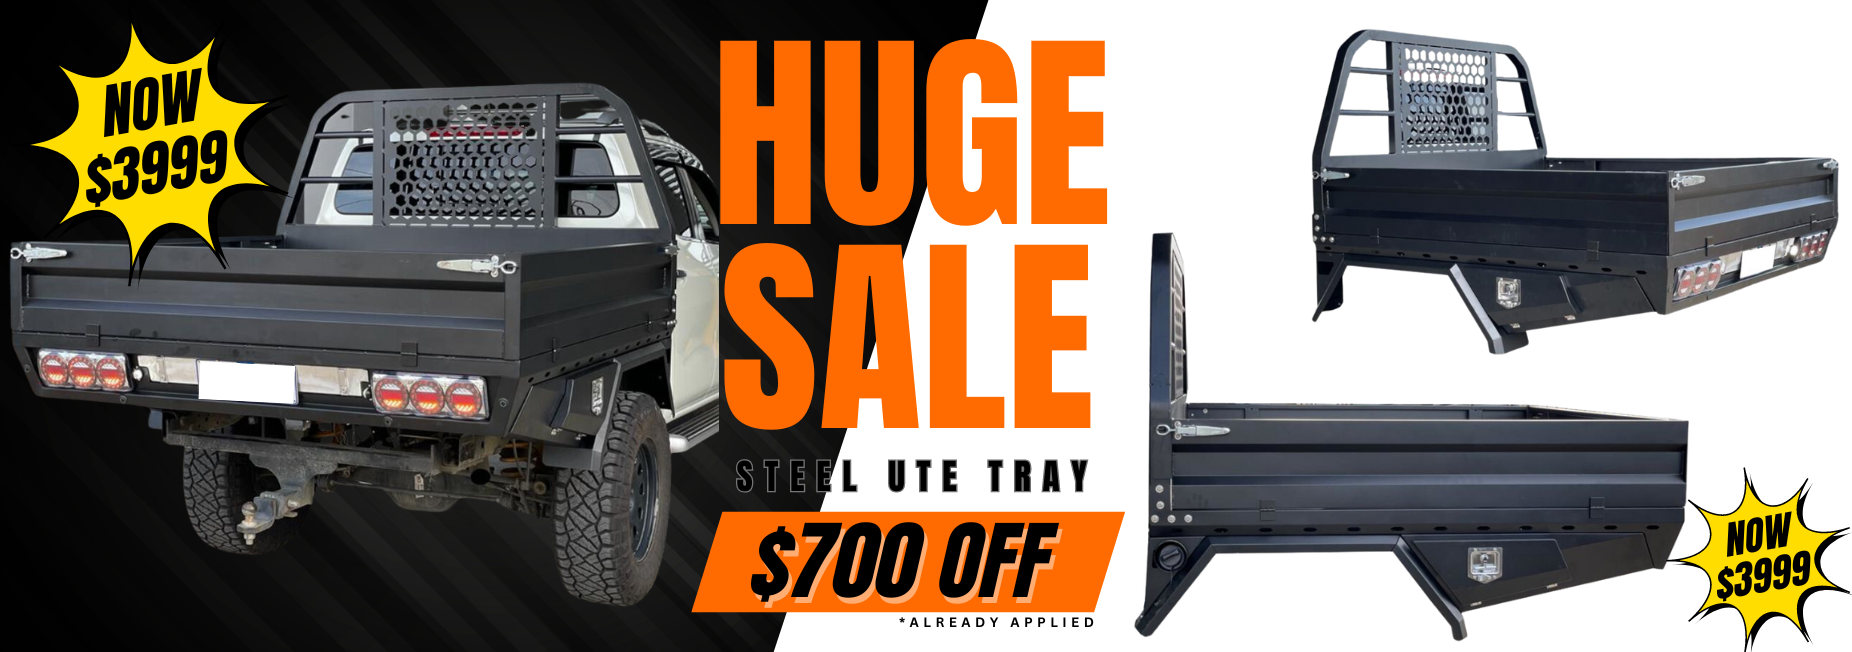 $700 OFF ON UTE TRAY